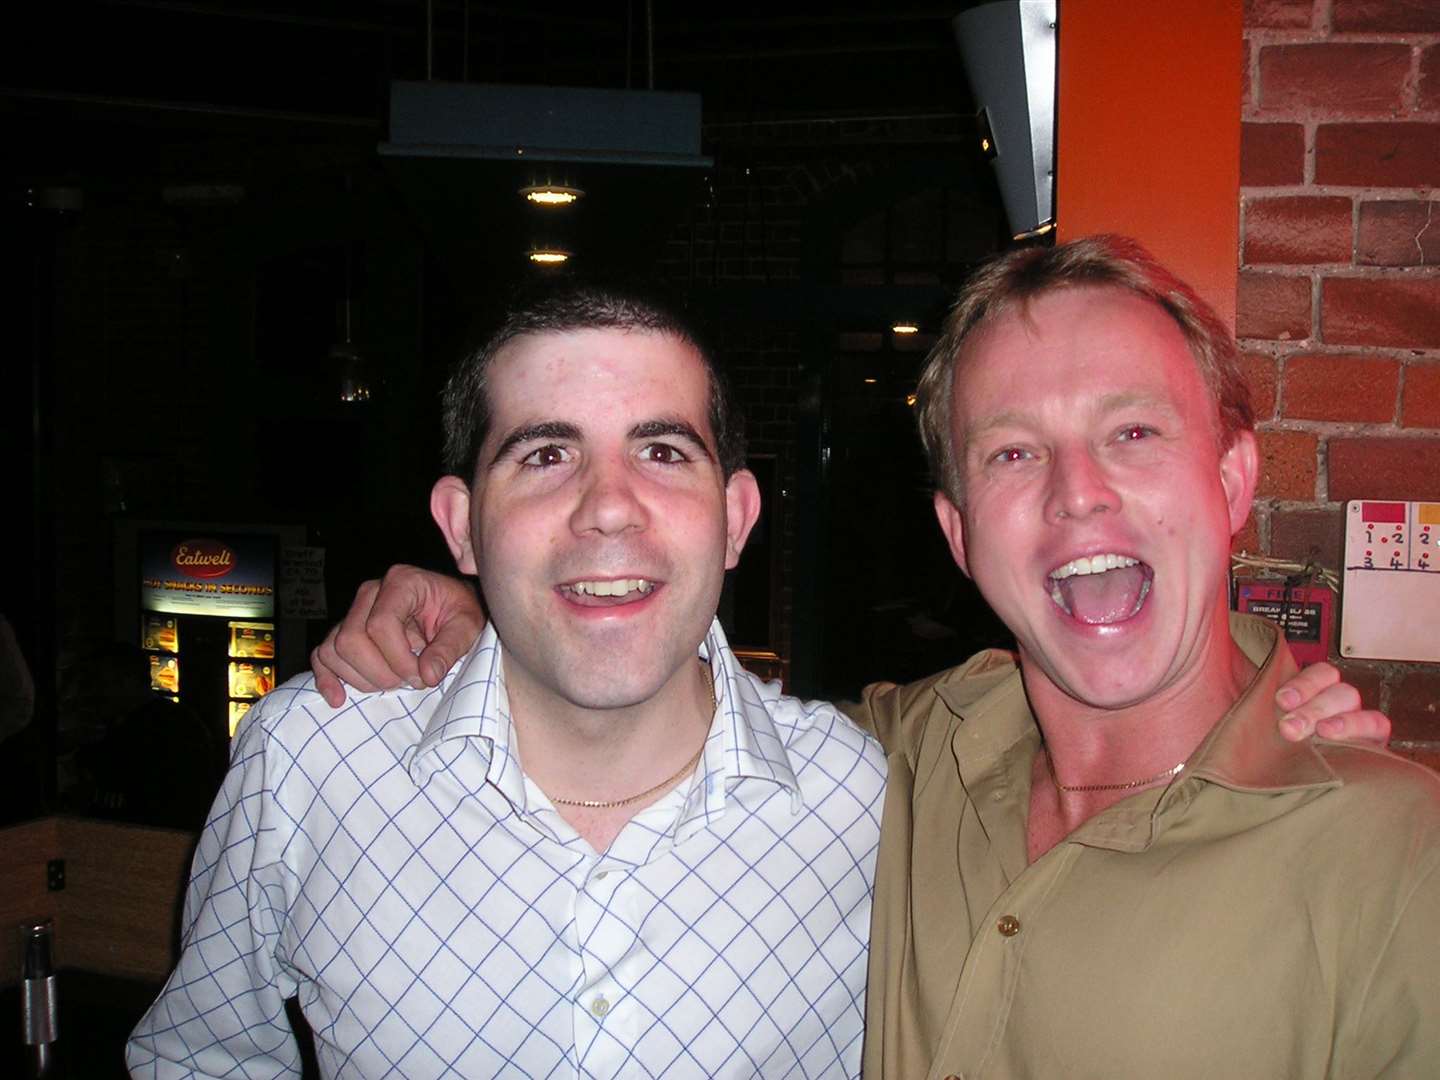 KMFM's Dibbzy and The Bill star Chris Simmons at The Bizz in Canterbury in 2003. Picture: The Bizz nightclub / Jon Mills